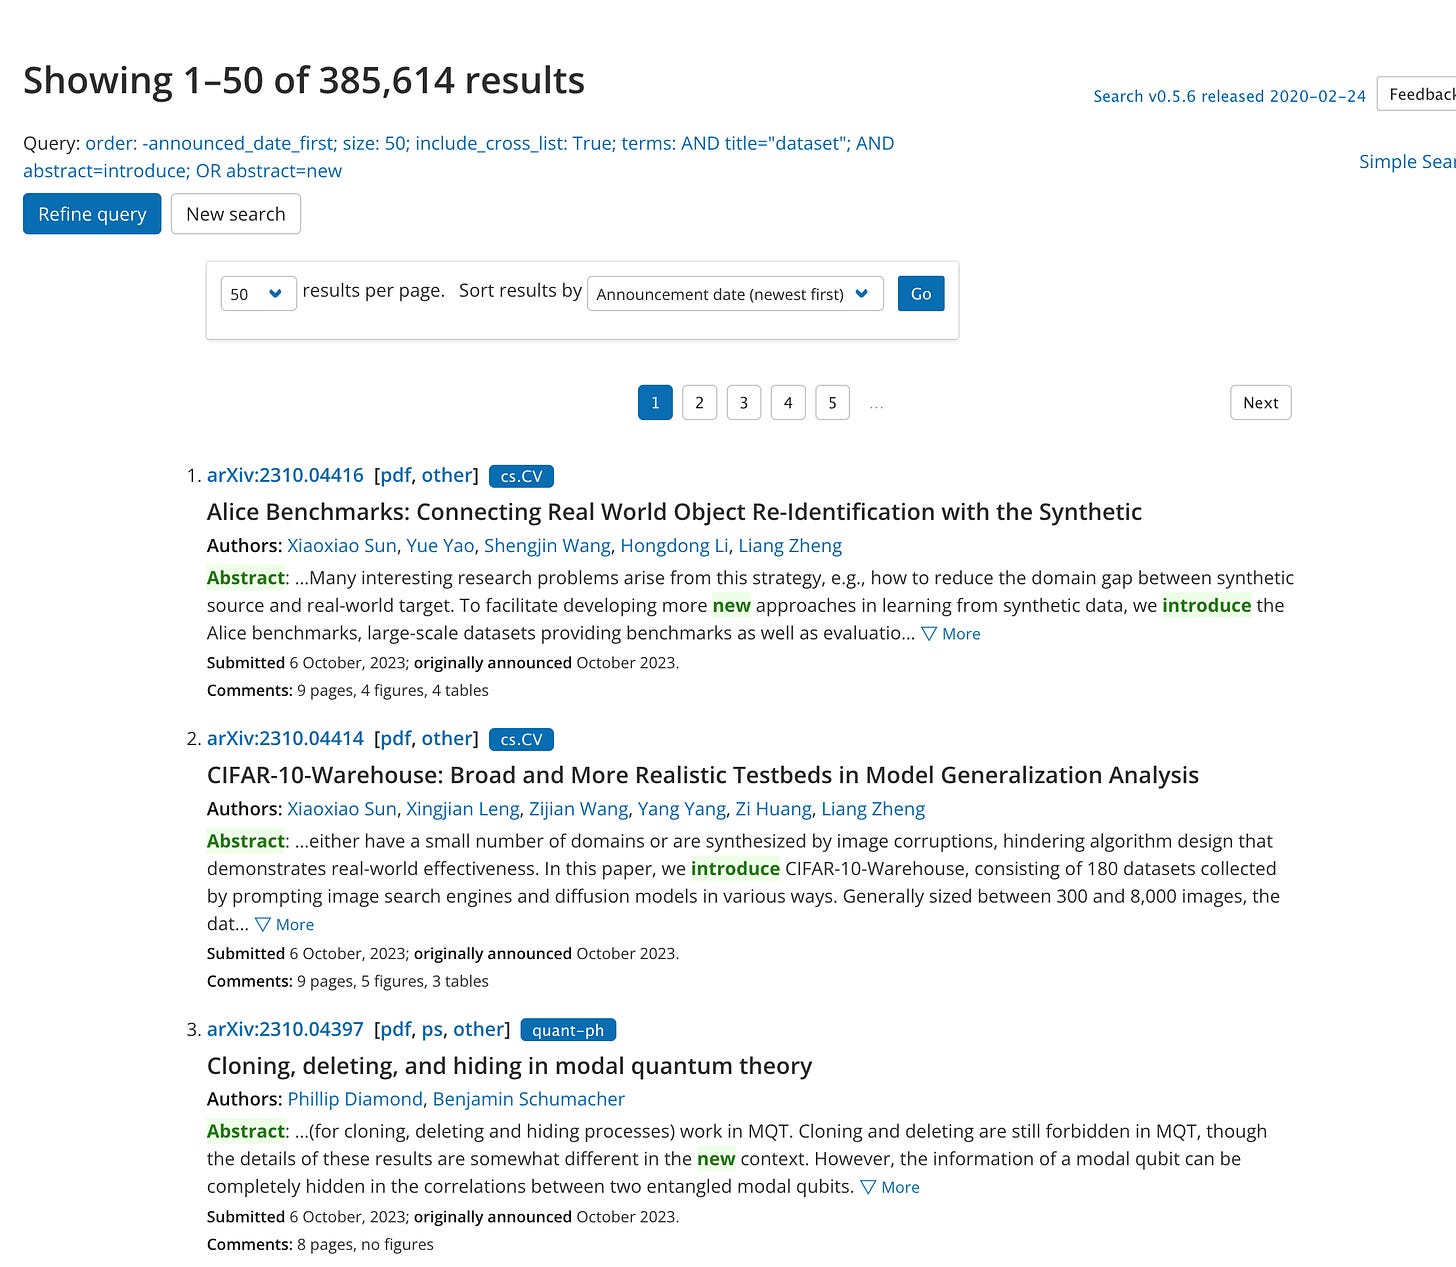 Search results for a more complex search. The results still show abstracts for papers which are not about new datasets